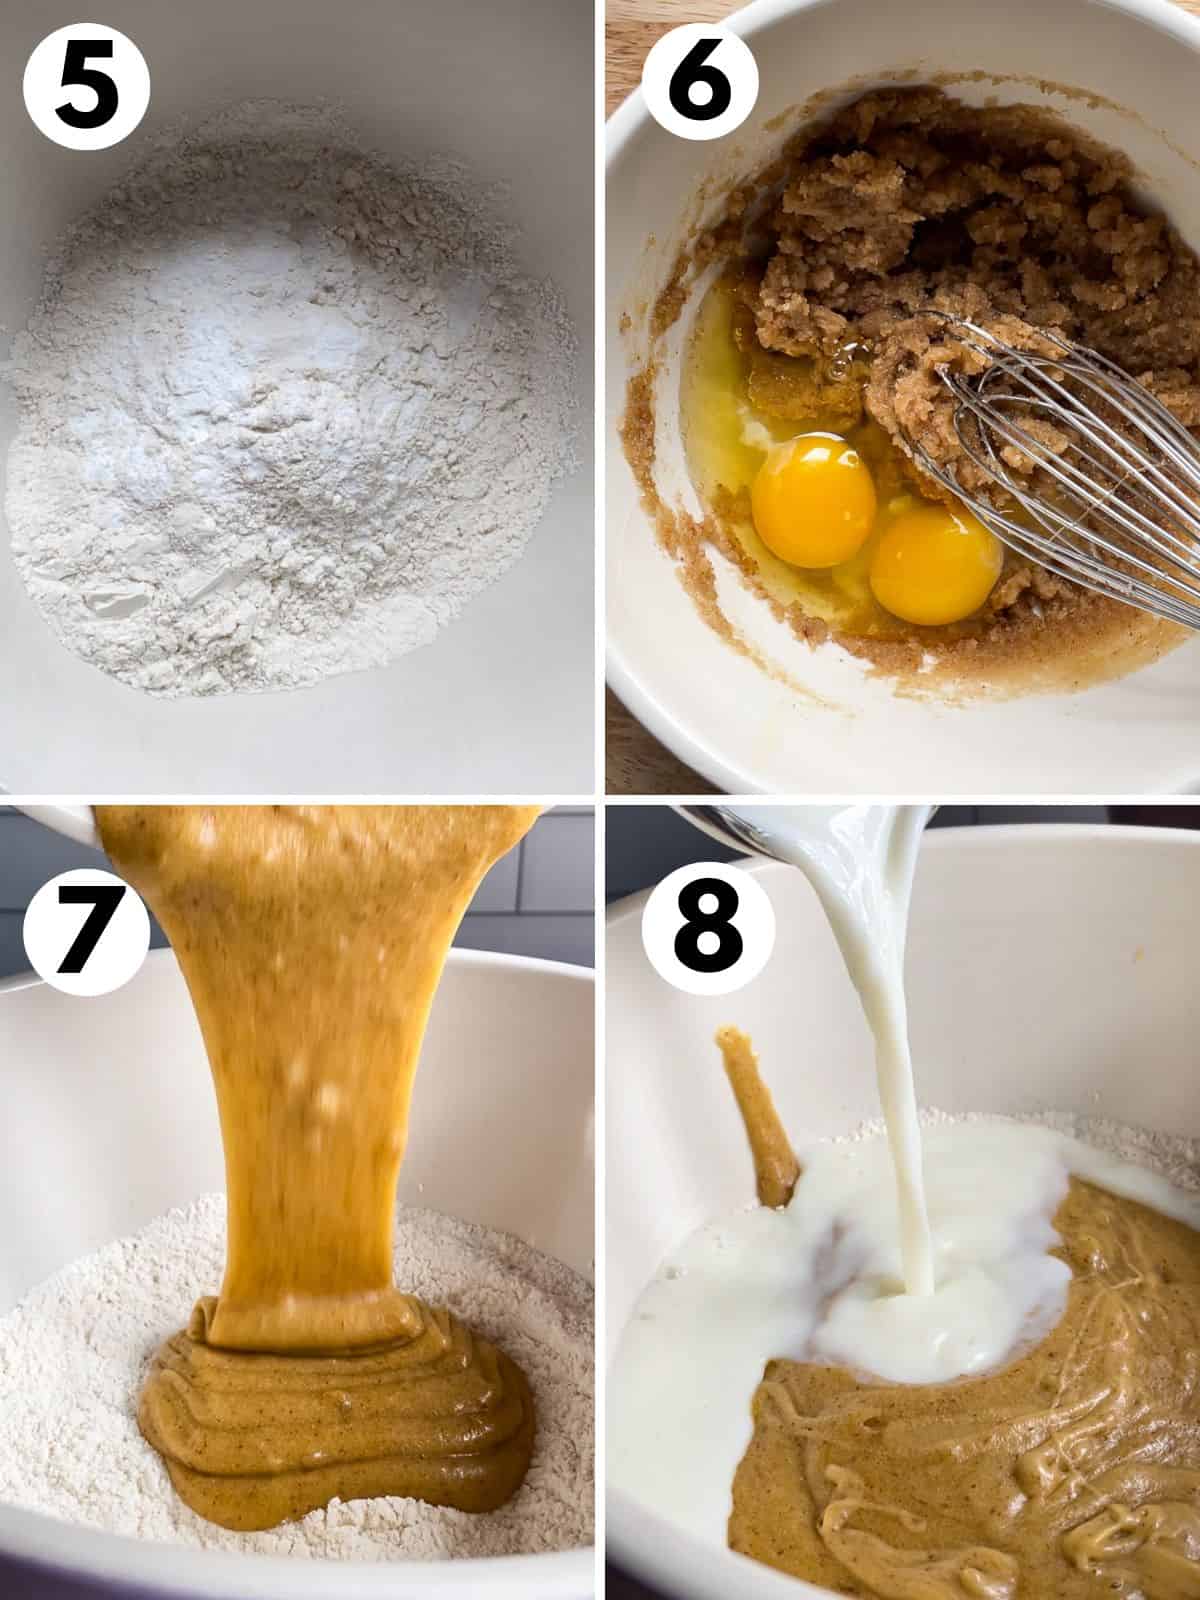 Mixing brown butter muffin batter. Whisking the dry ingredients. Mixing the brown butter with eggs. Adding the brown butter and sugar to the dry ingredients. Pouring the milk into the batter.